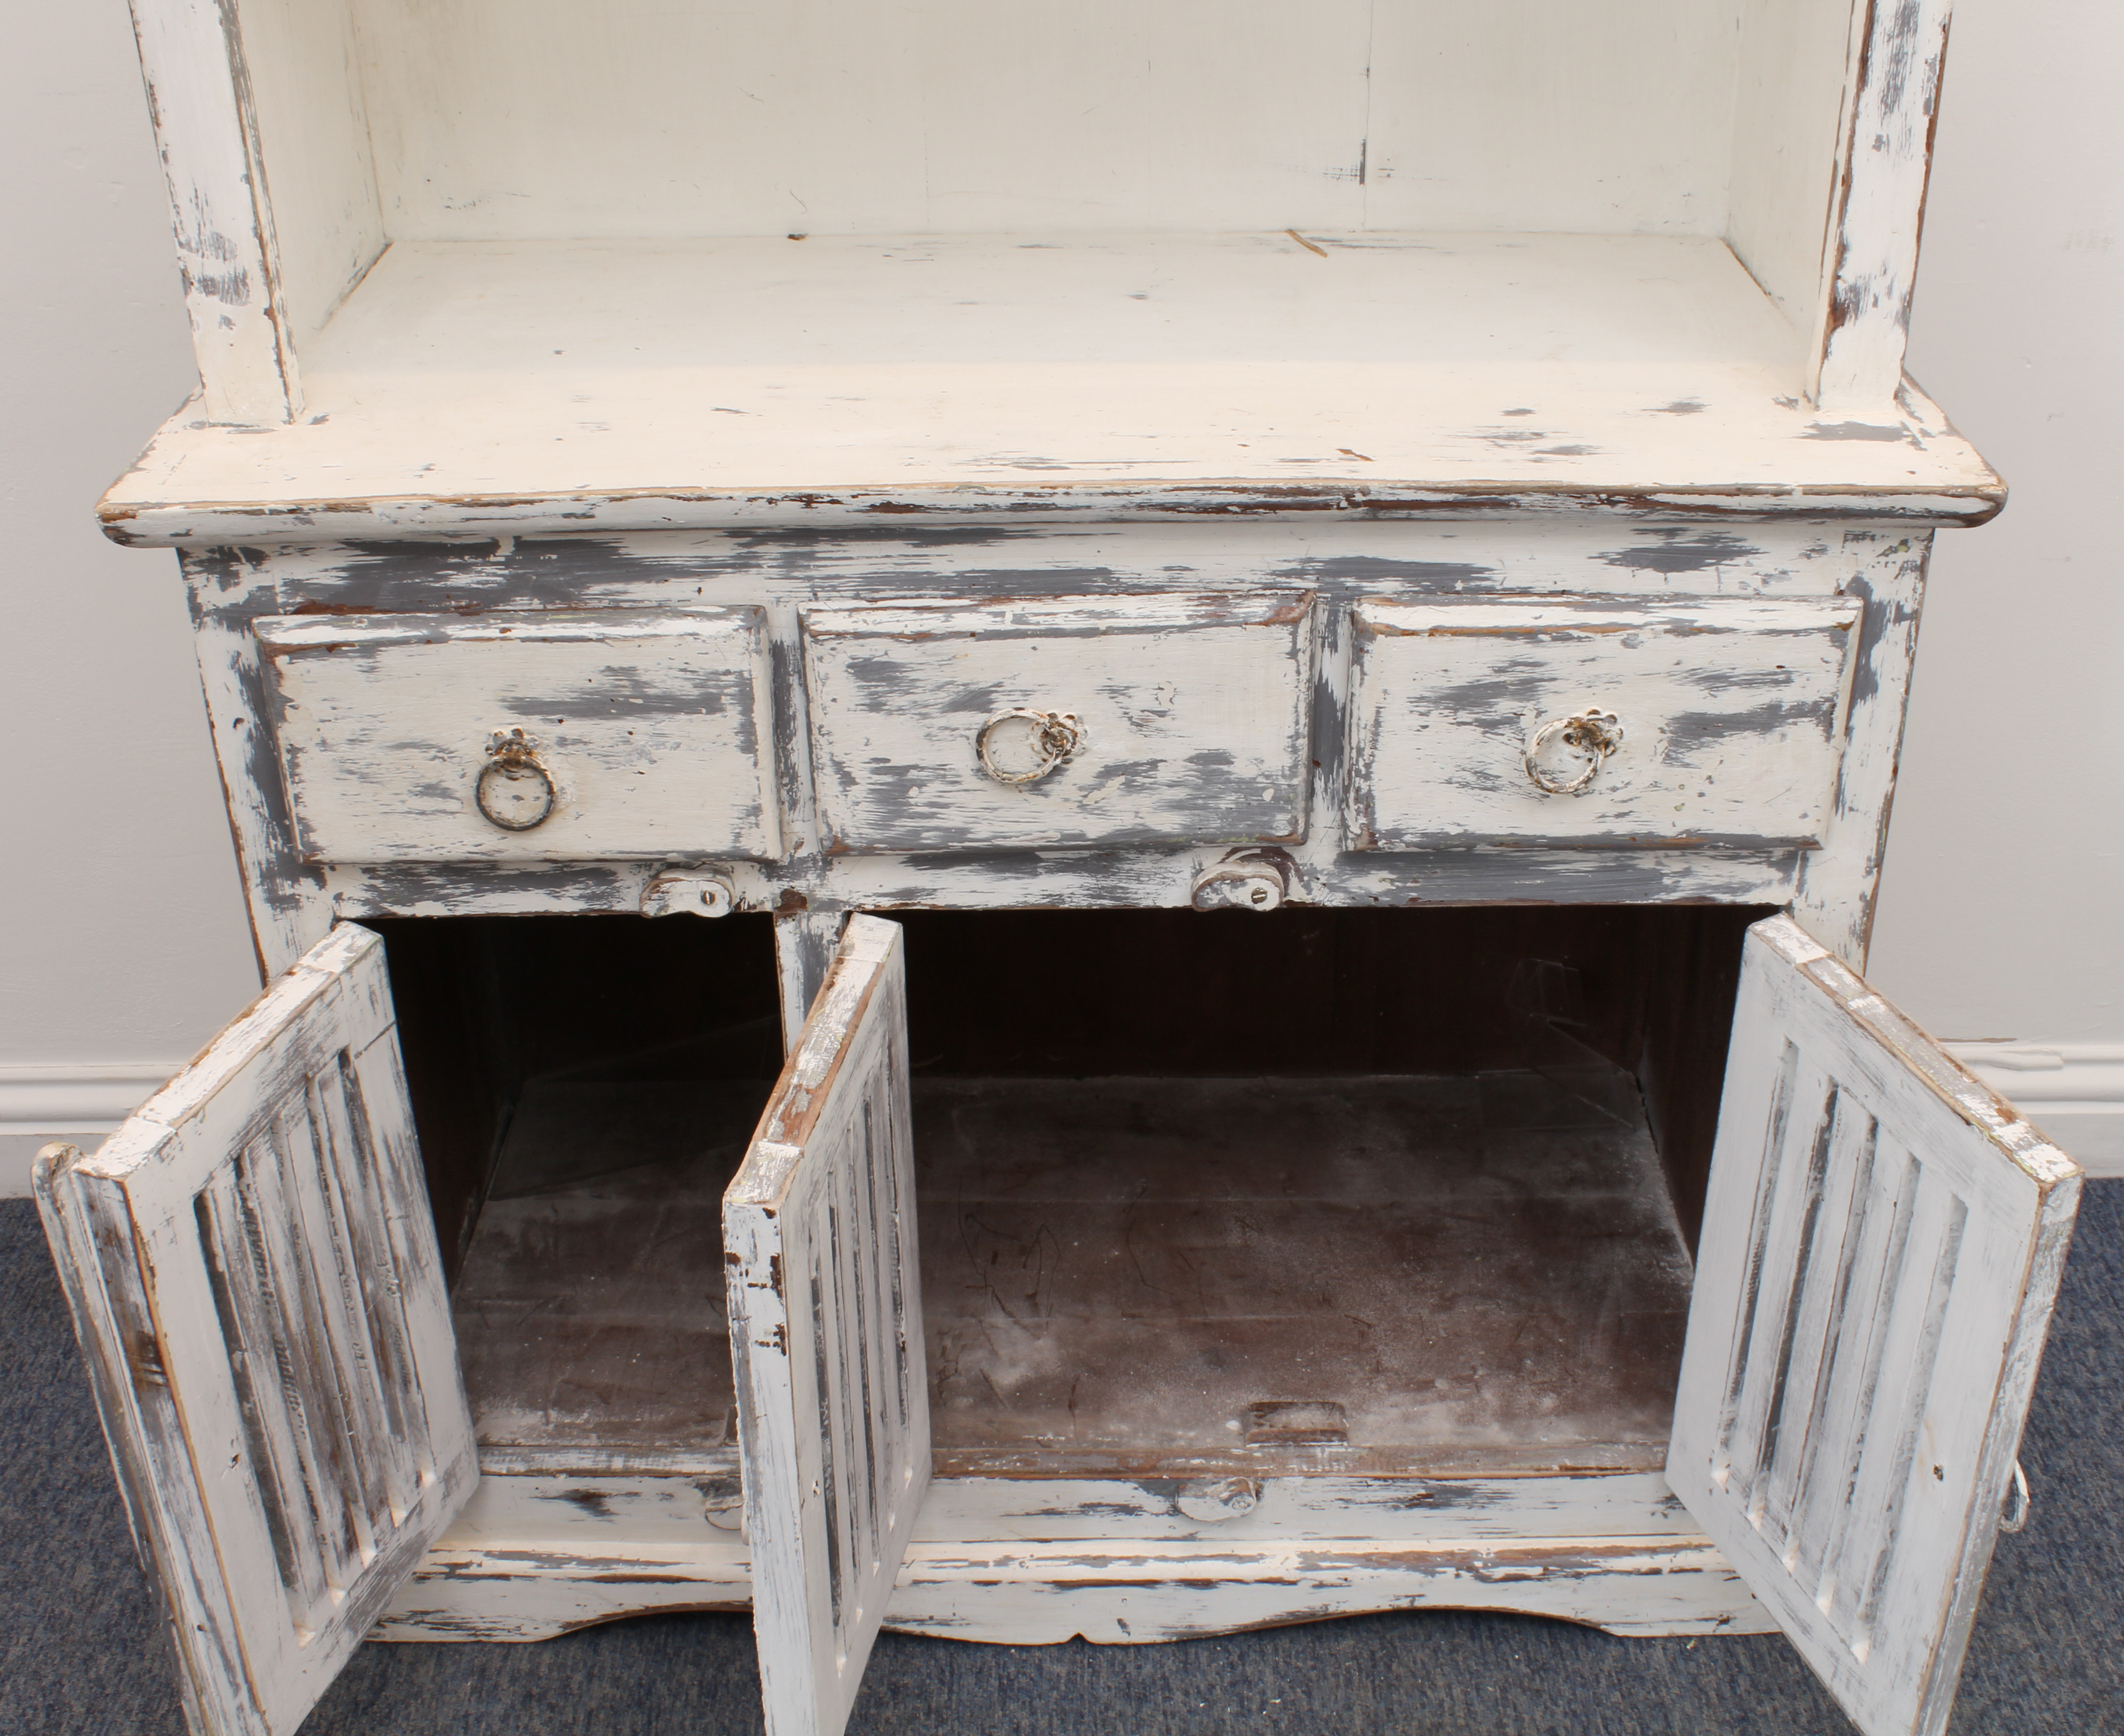 An Indian hardwood kitchen dresser painted in the shabby chic style - mid-20th century, the - Image 3 of 4